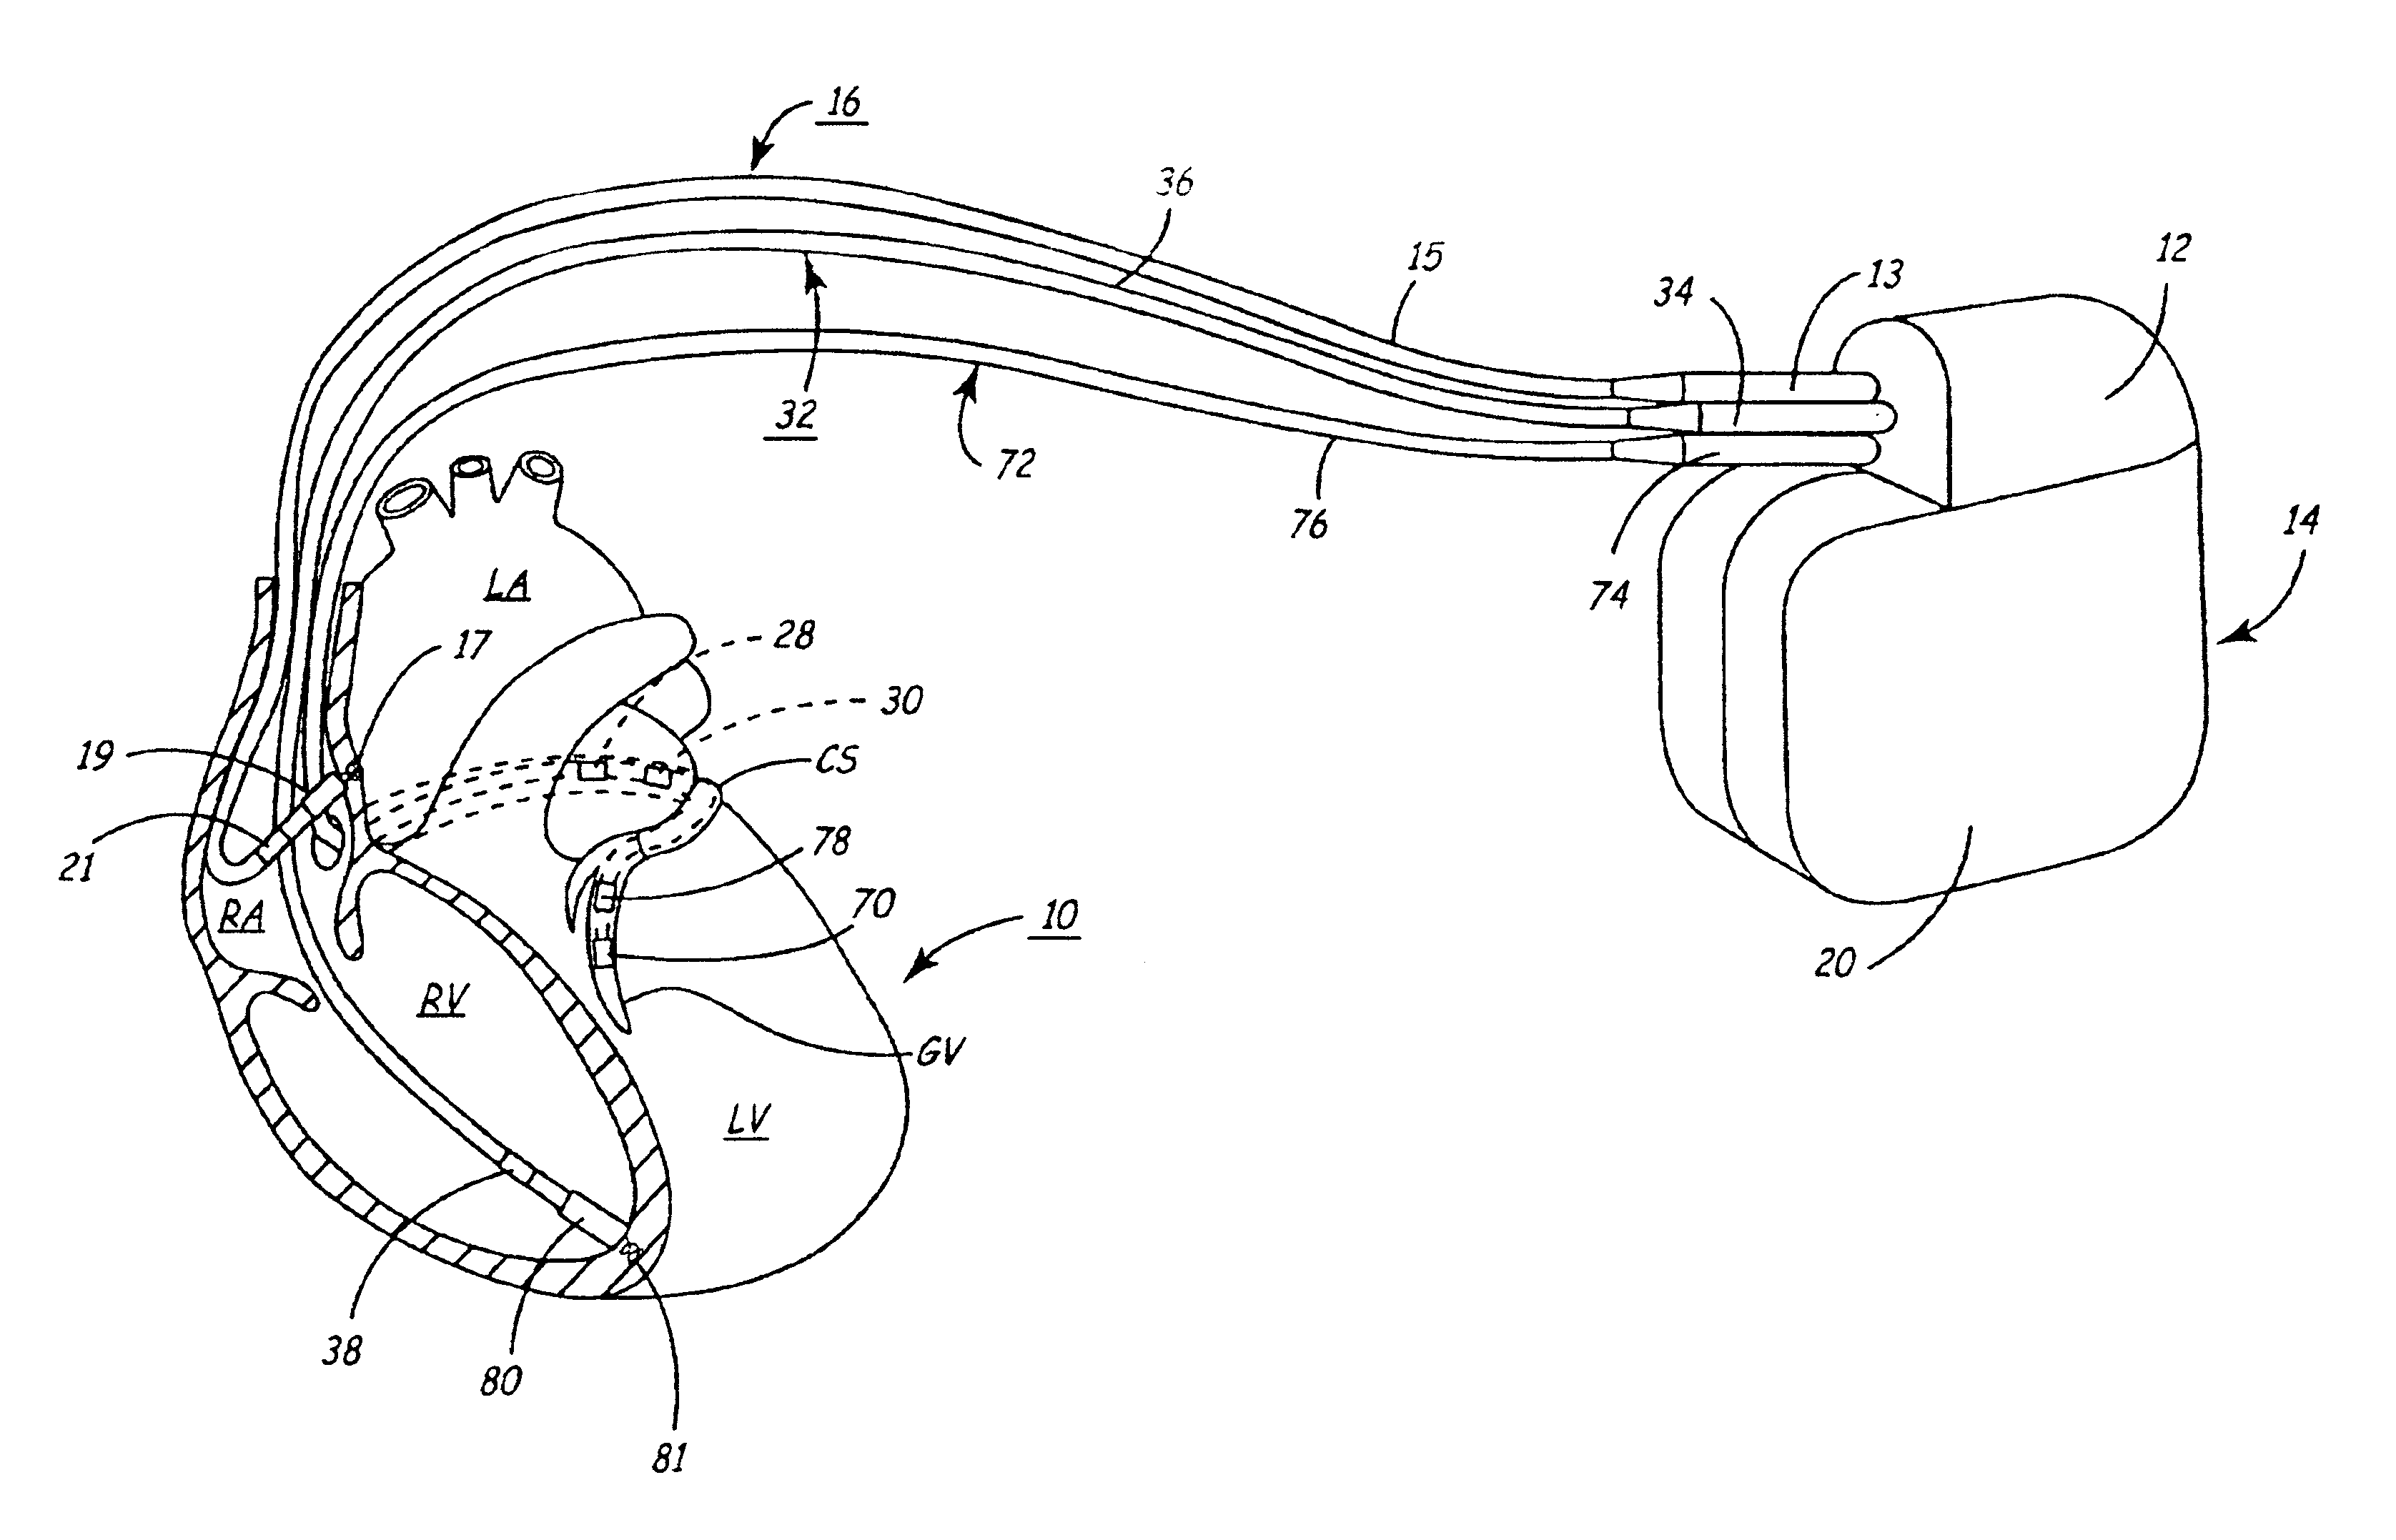 Enhanced method and apparatus to identify and connect a small diameter lead with a low profile lead connector